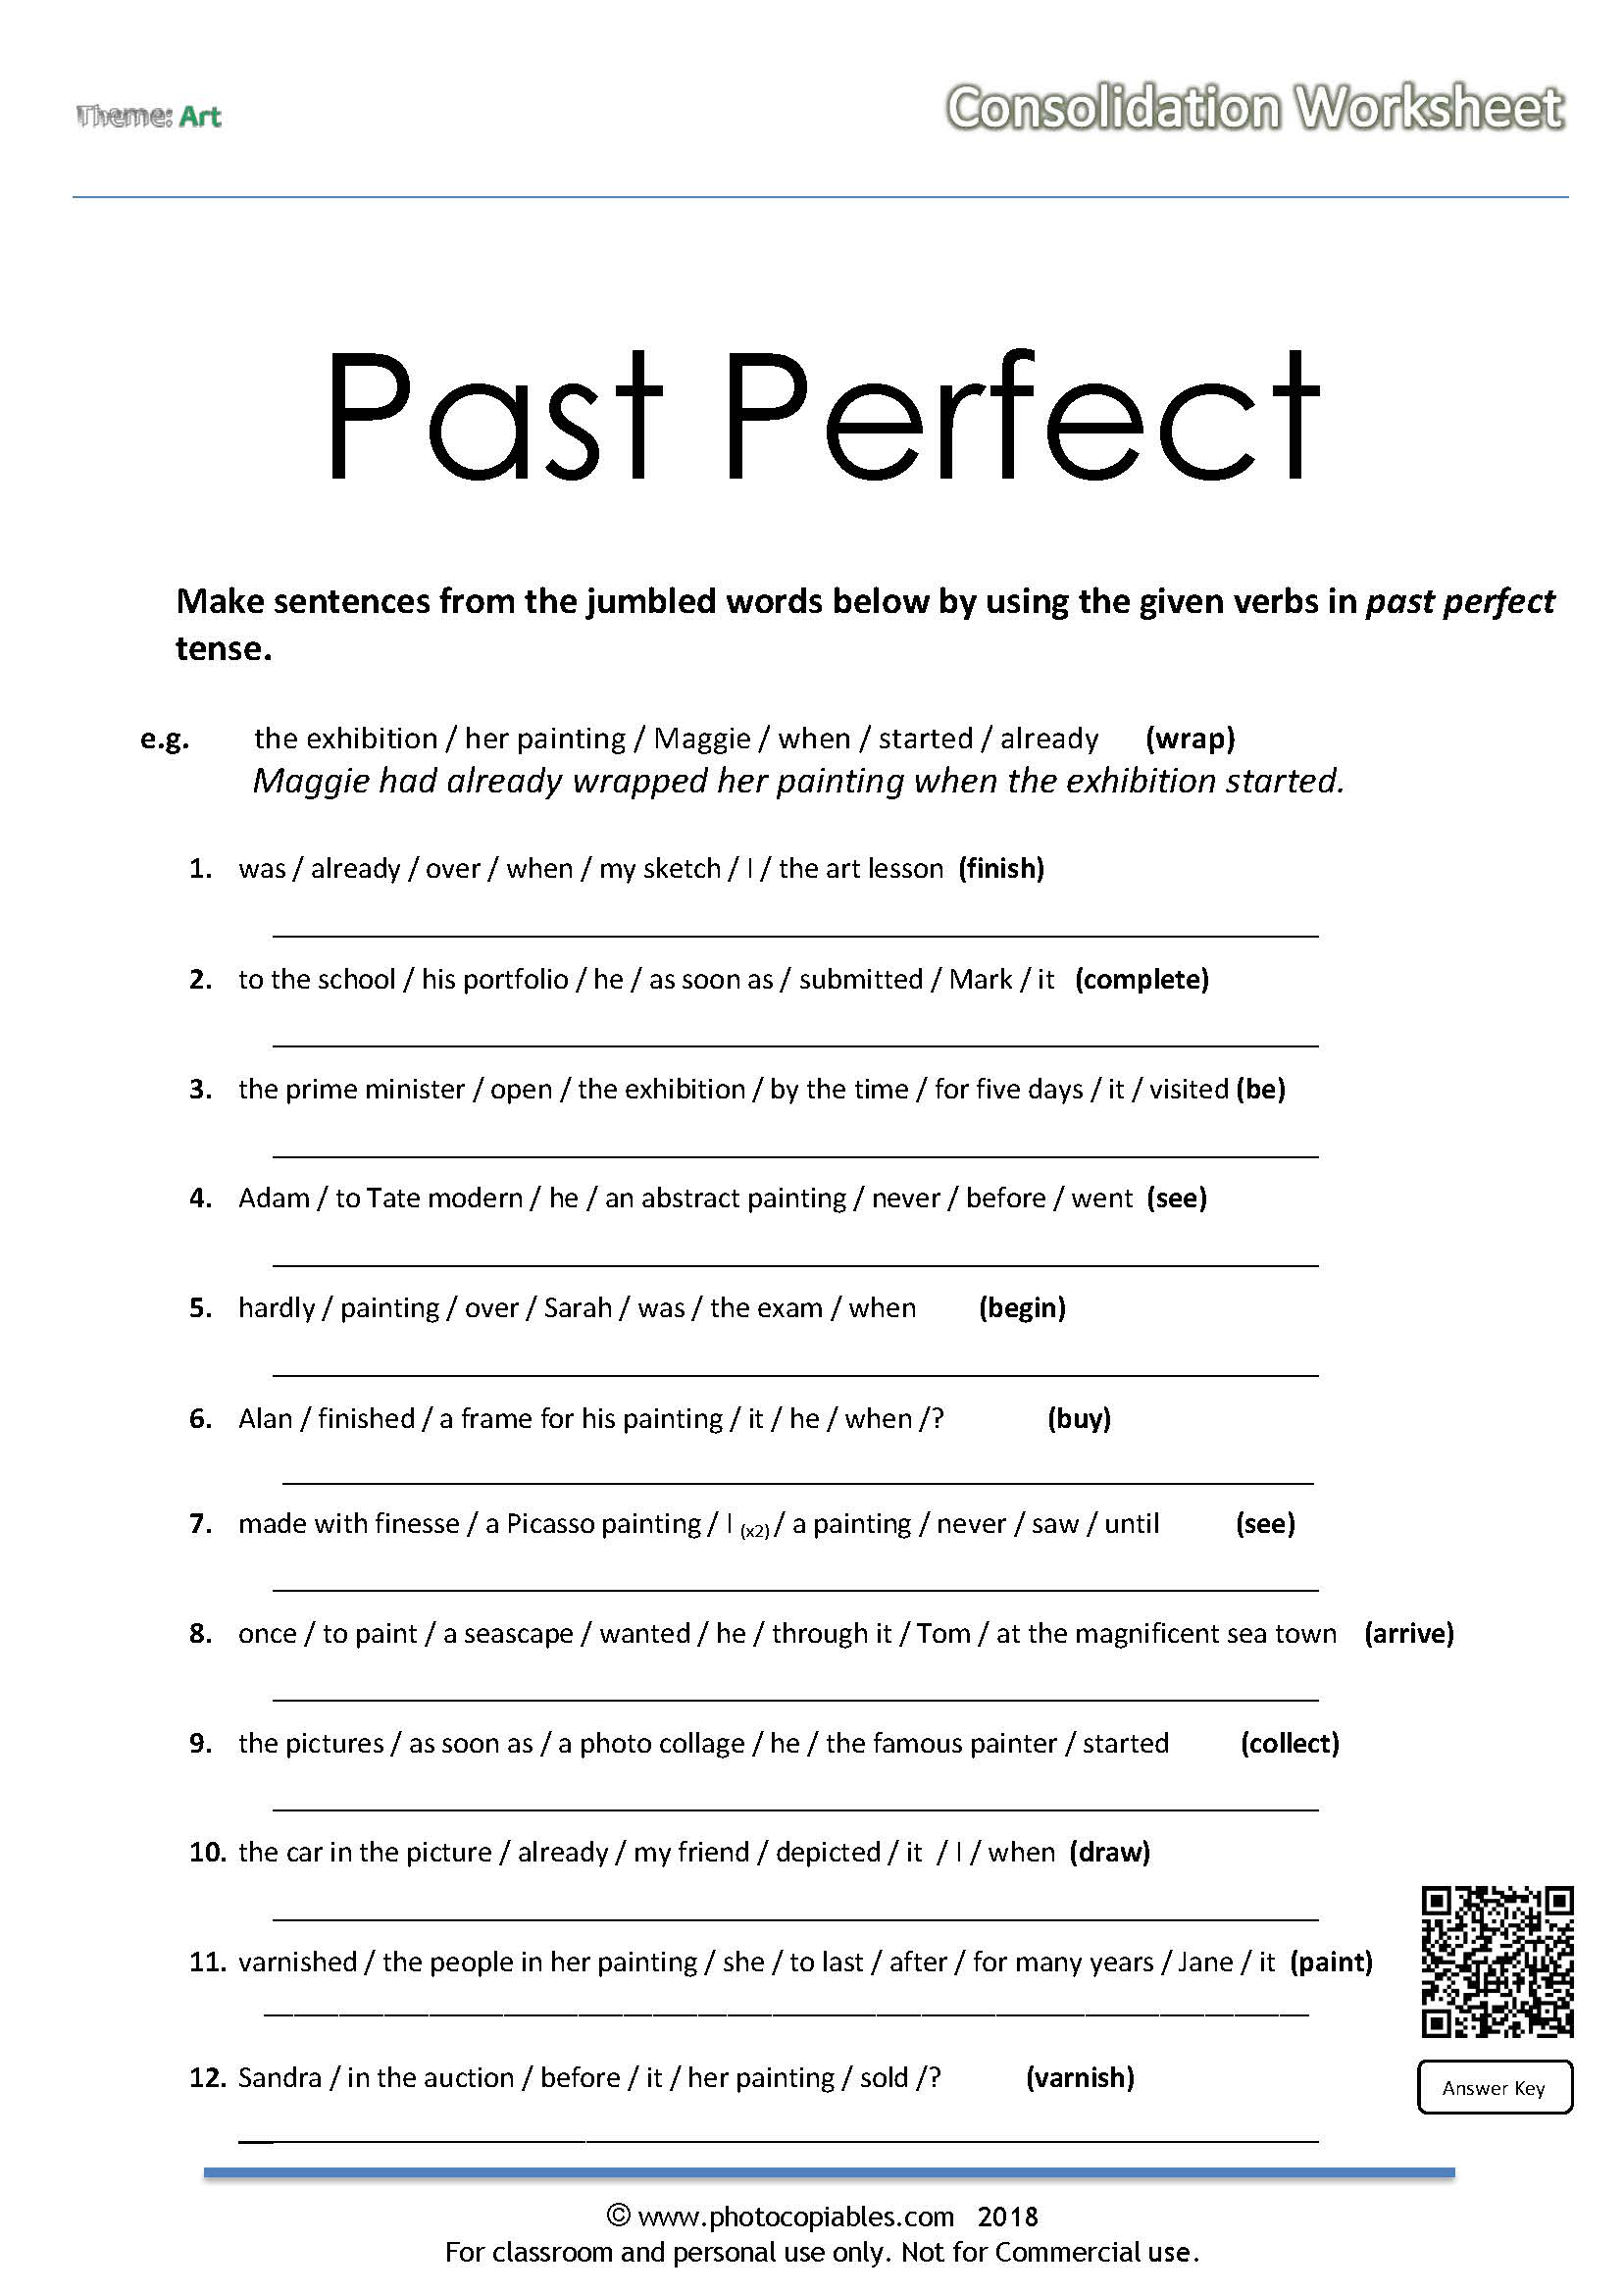 past-perfect-tense-worksheets-with-answers-perfect-tense-past-tense